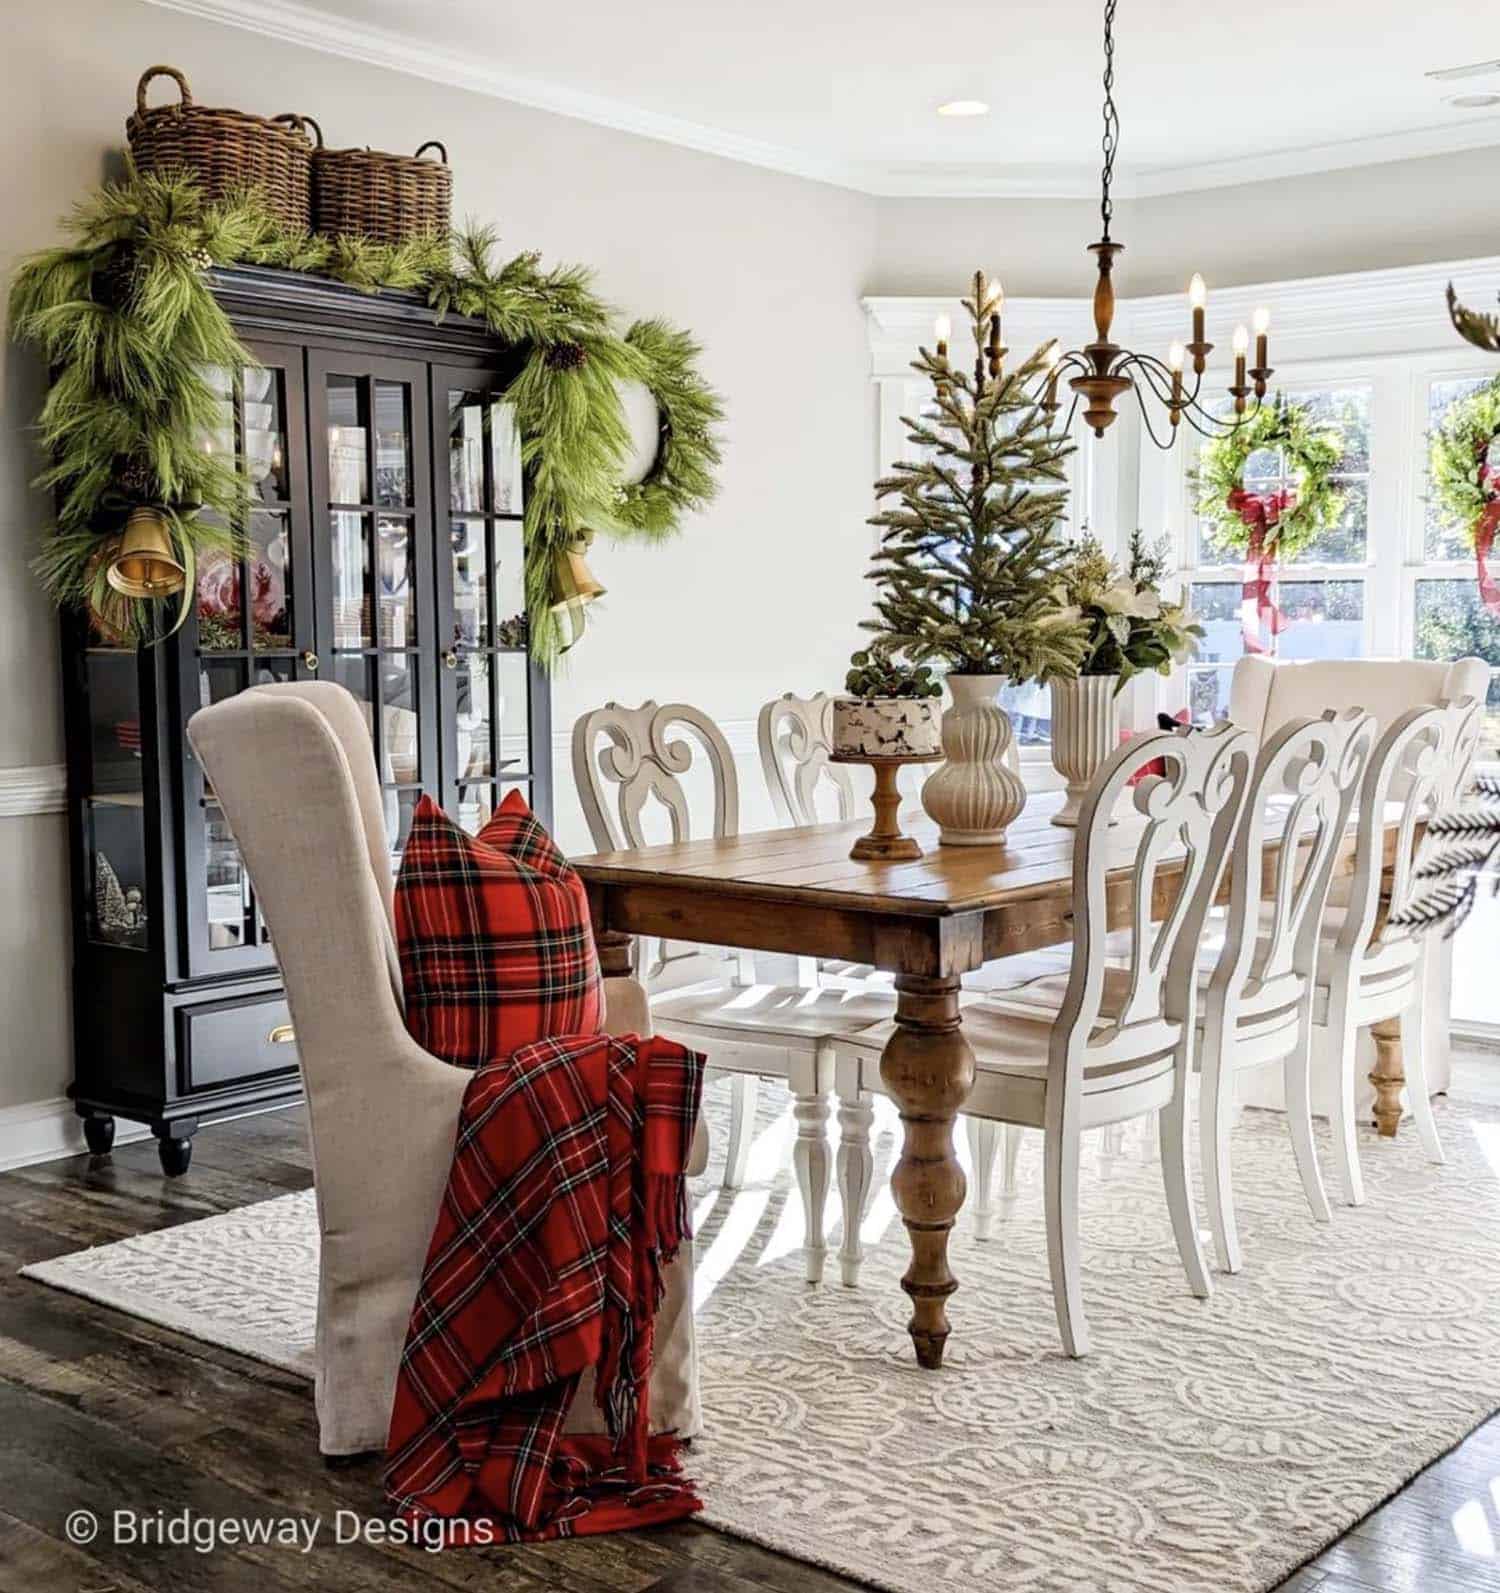 Christmas decorated dining table with a small tree as the centerpiece